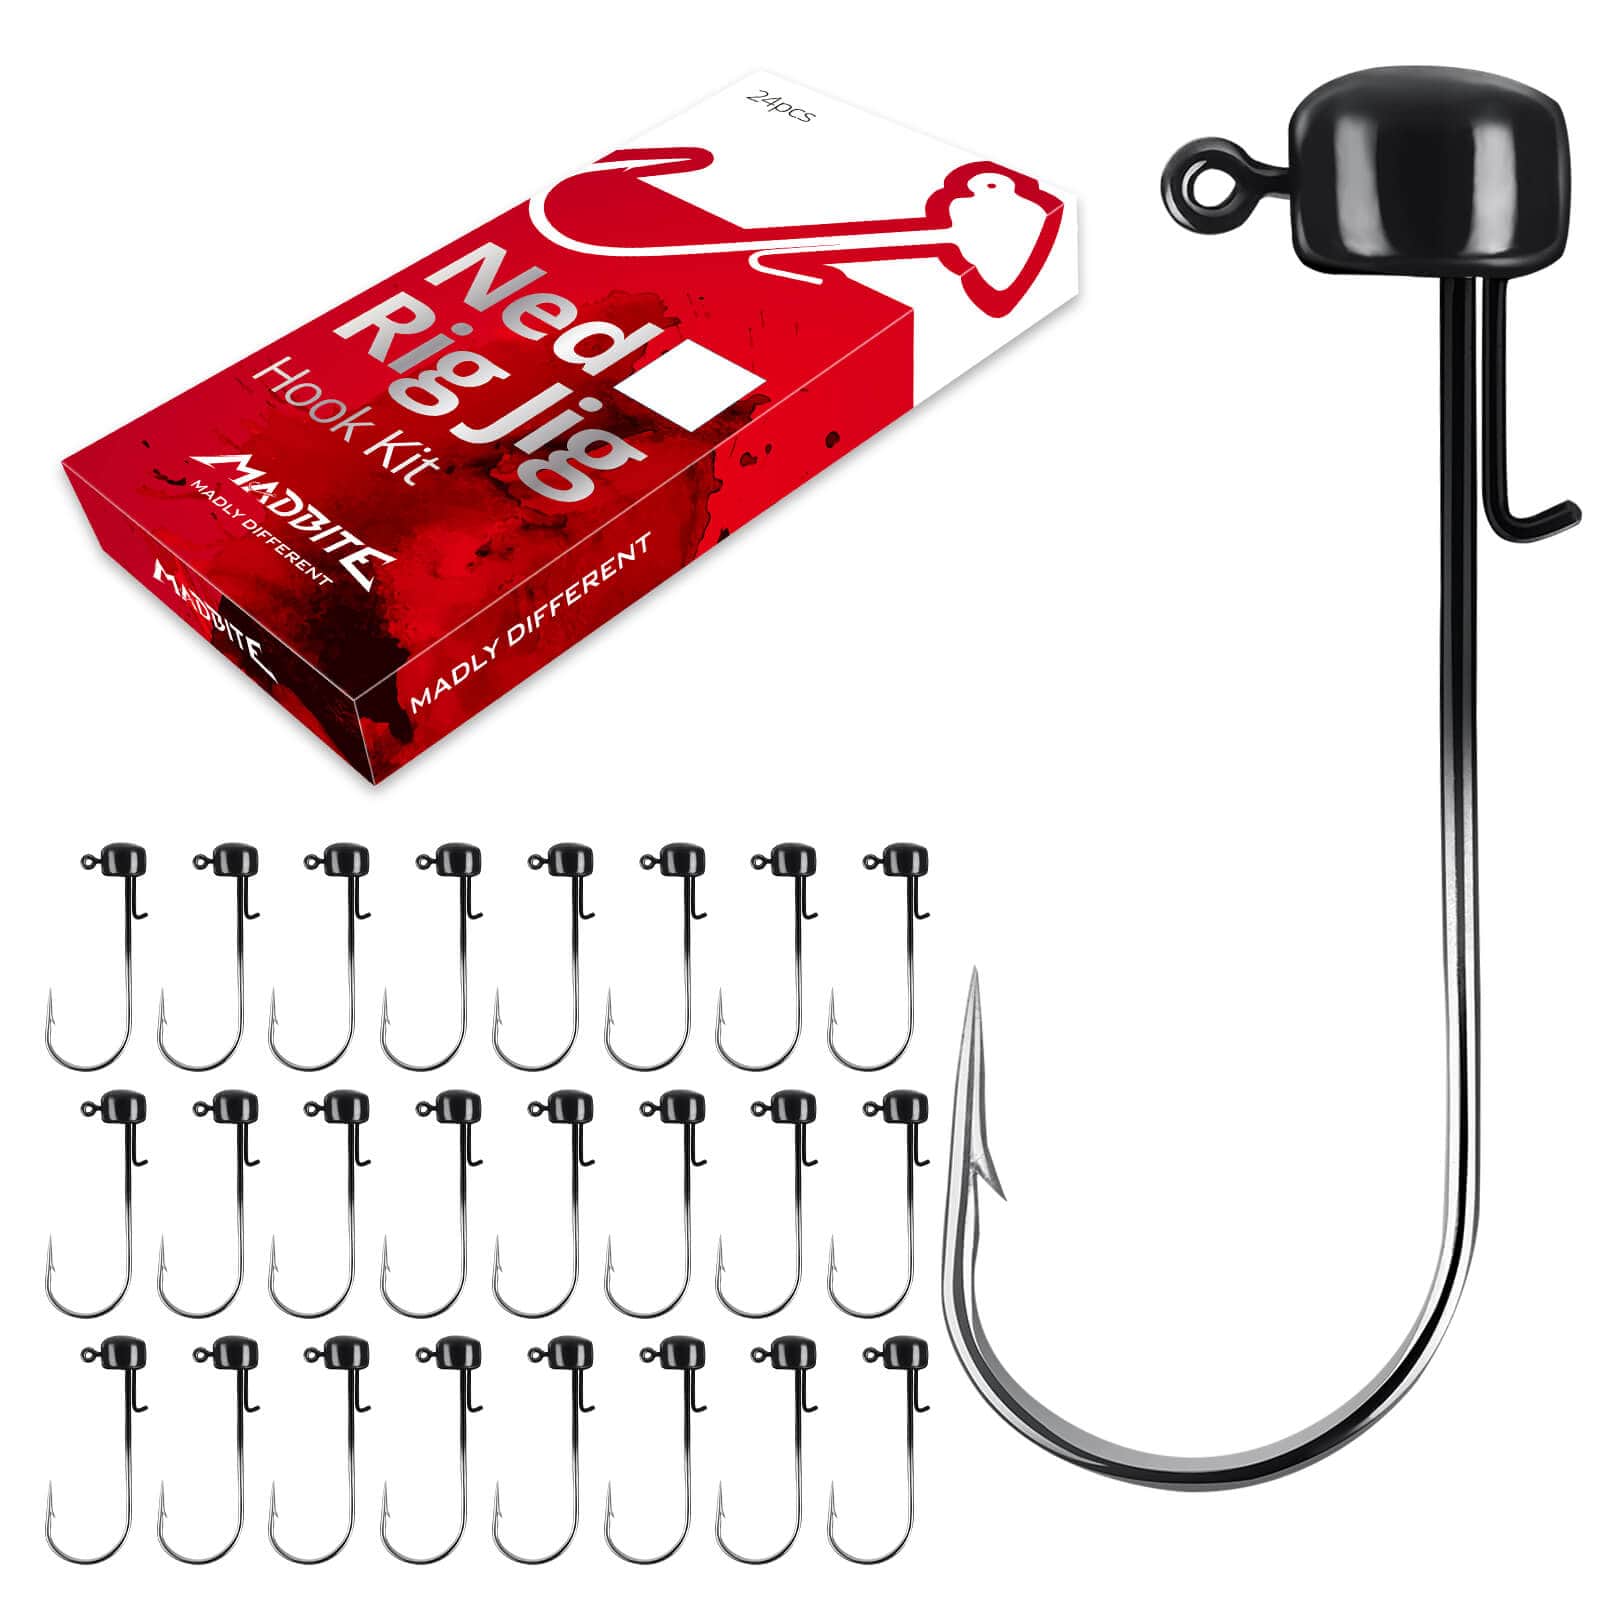 KastKing MadBite 24 Pcs Ned Rig Jig Hook Kits 2 for $12.80 to $16.64 + Free Shipping